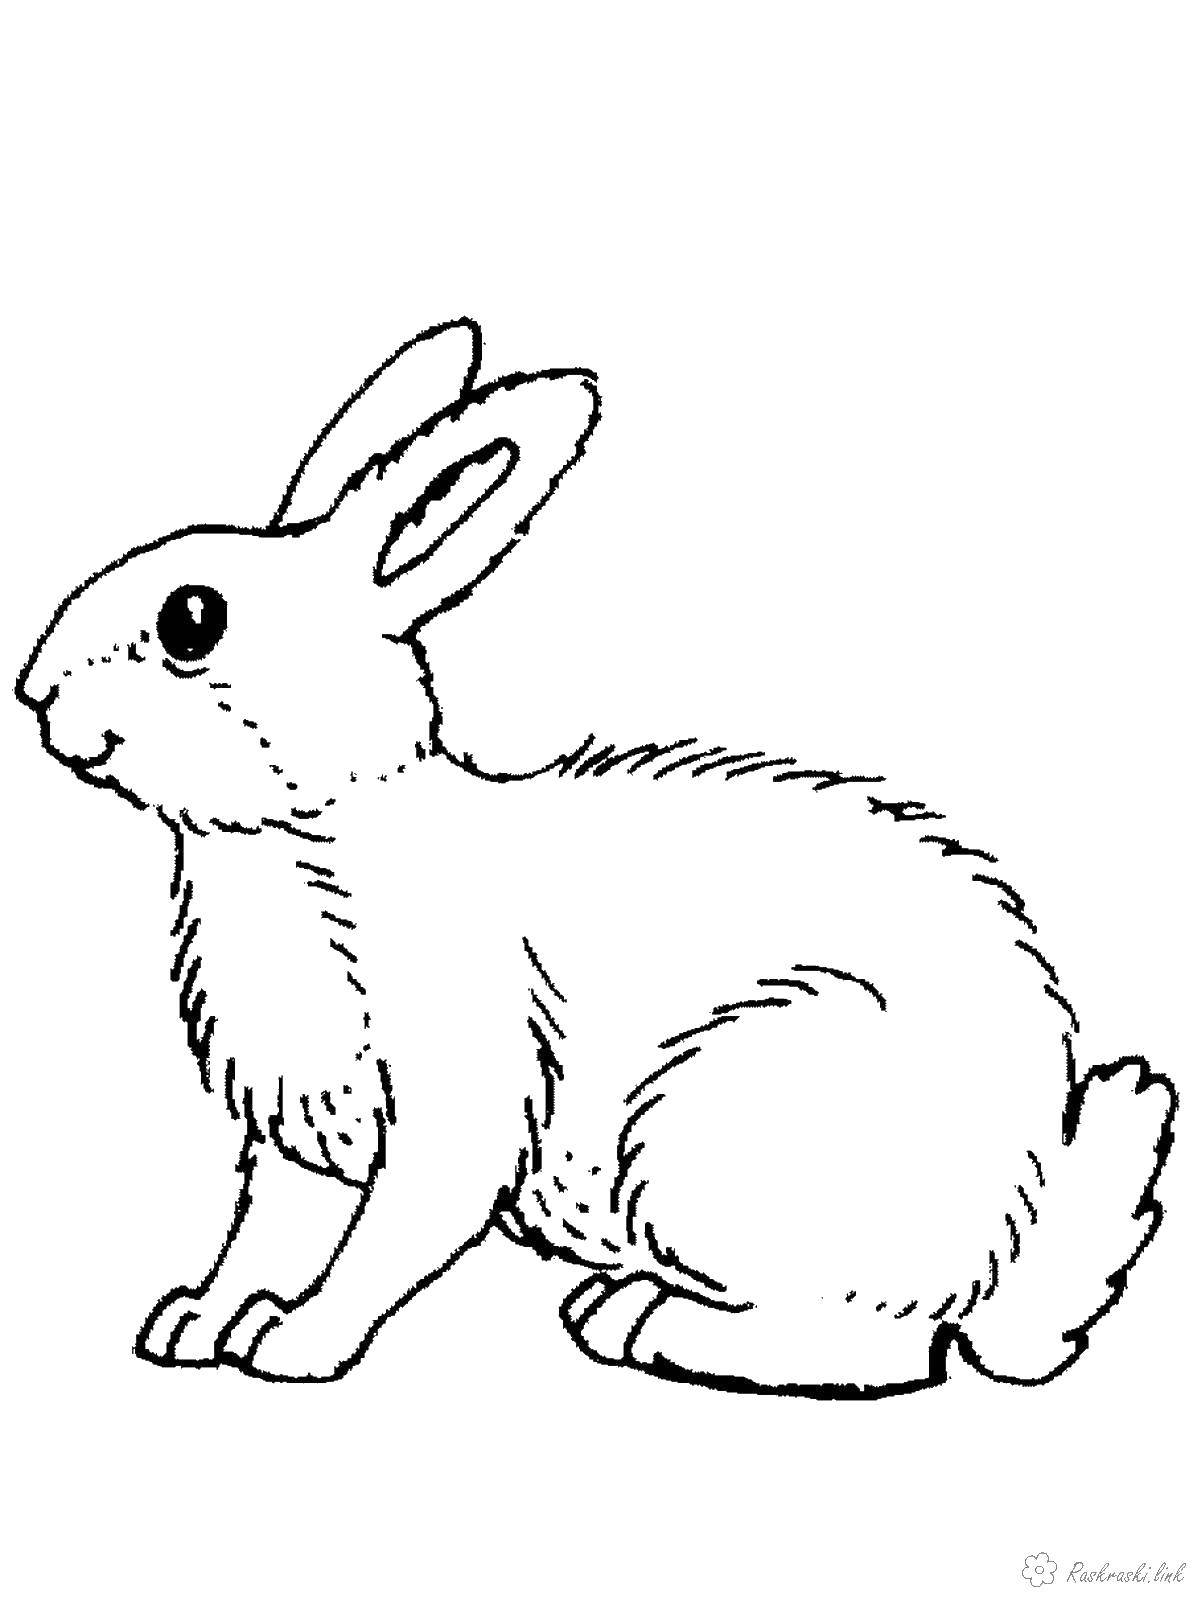 Coloring Rabbit. Category wild animals. Tags:  the rabbit.